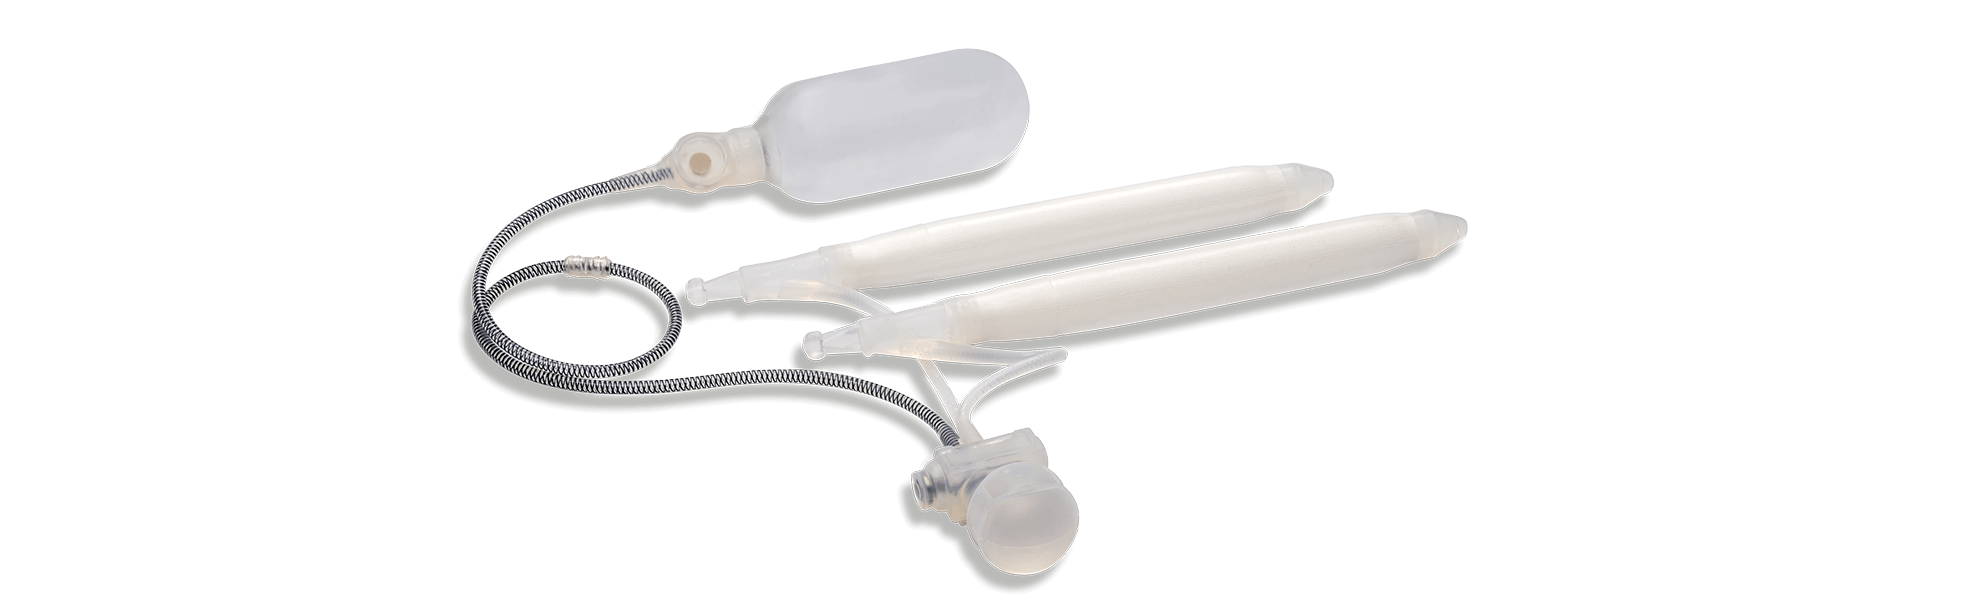 Infla10 RX Inflatable Penile Prosthesis